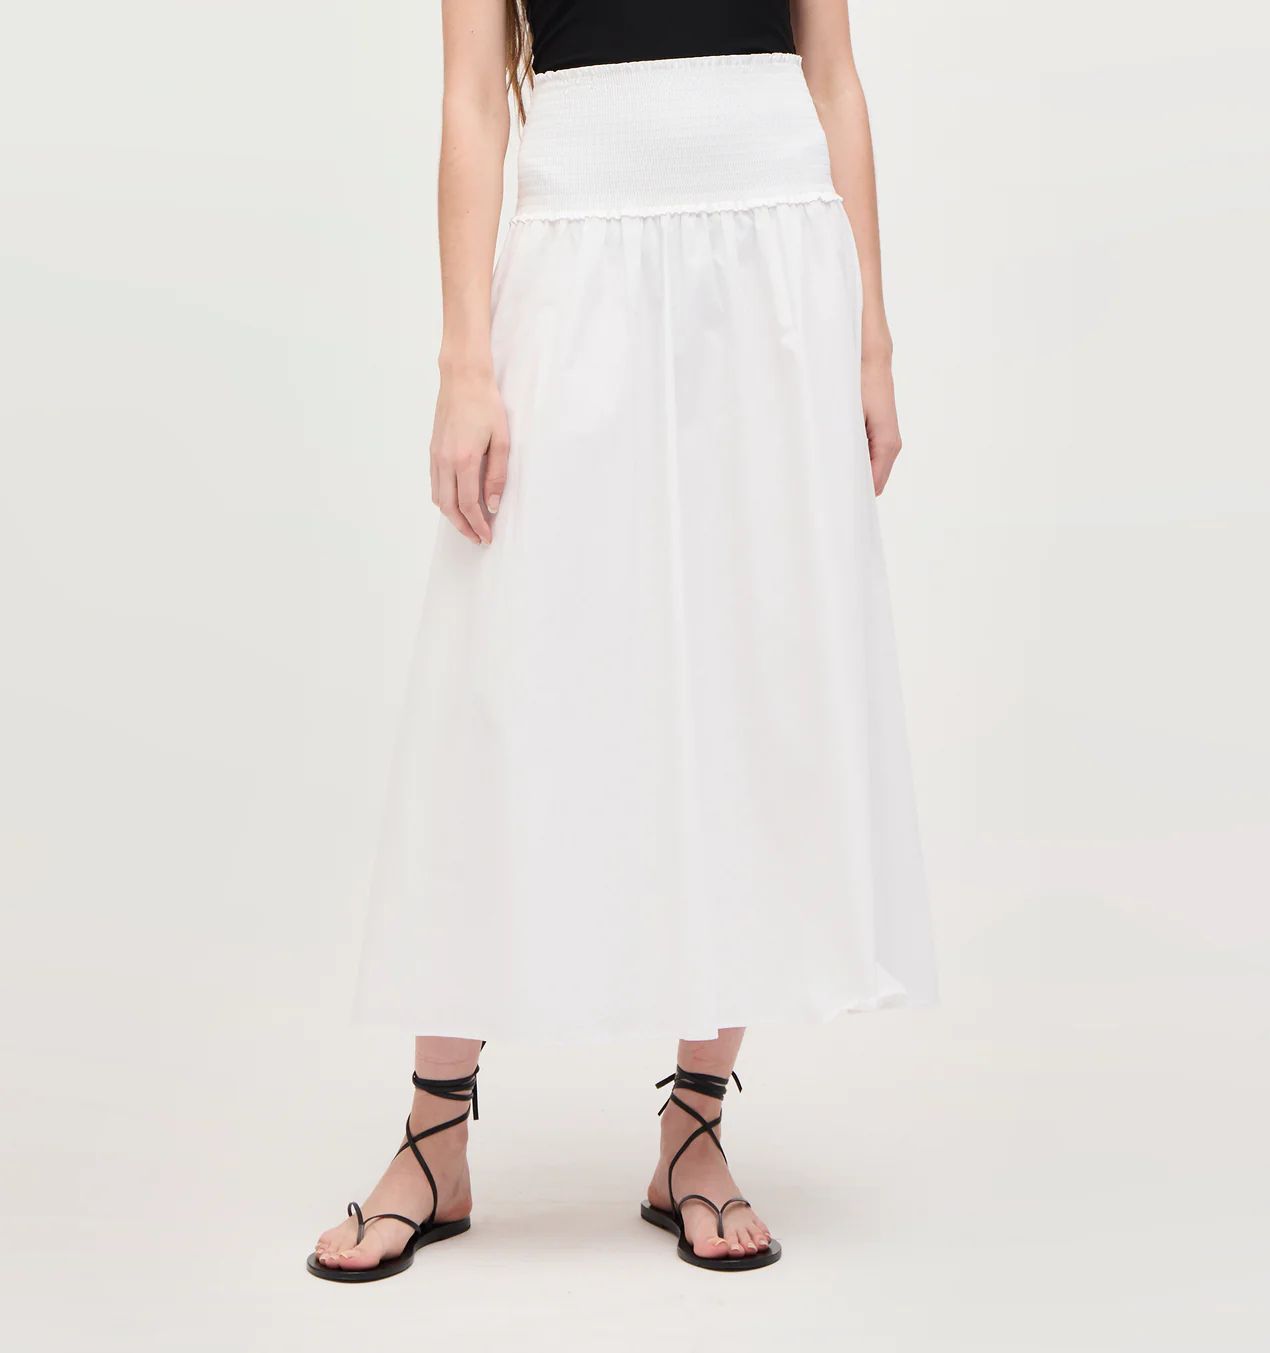 The Delphine Nap Skirt - White Cotton | Hill House Home